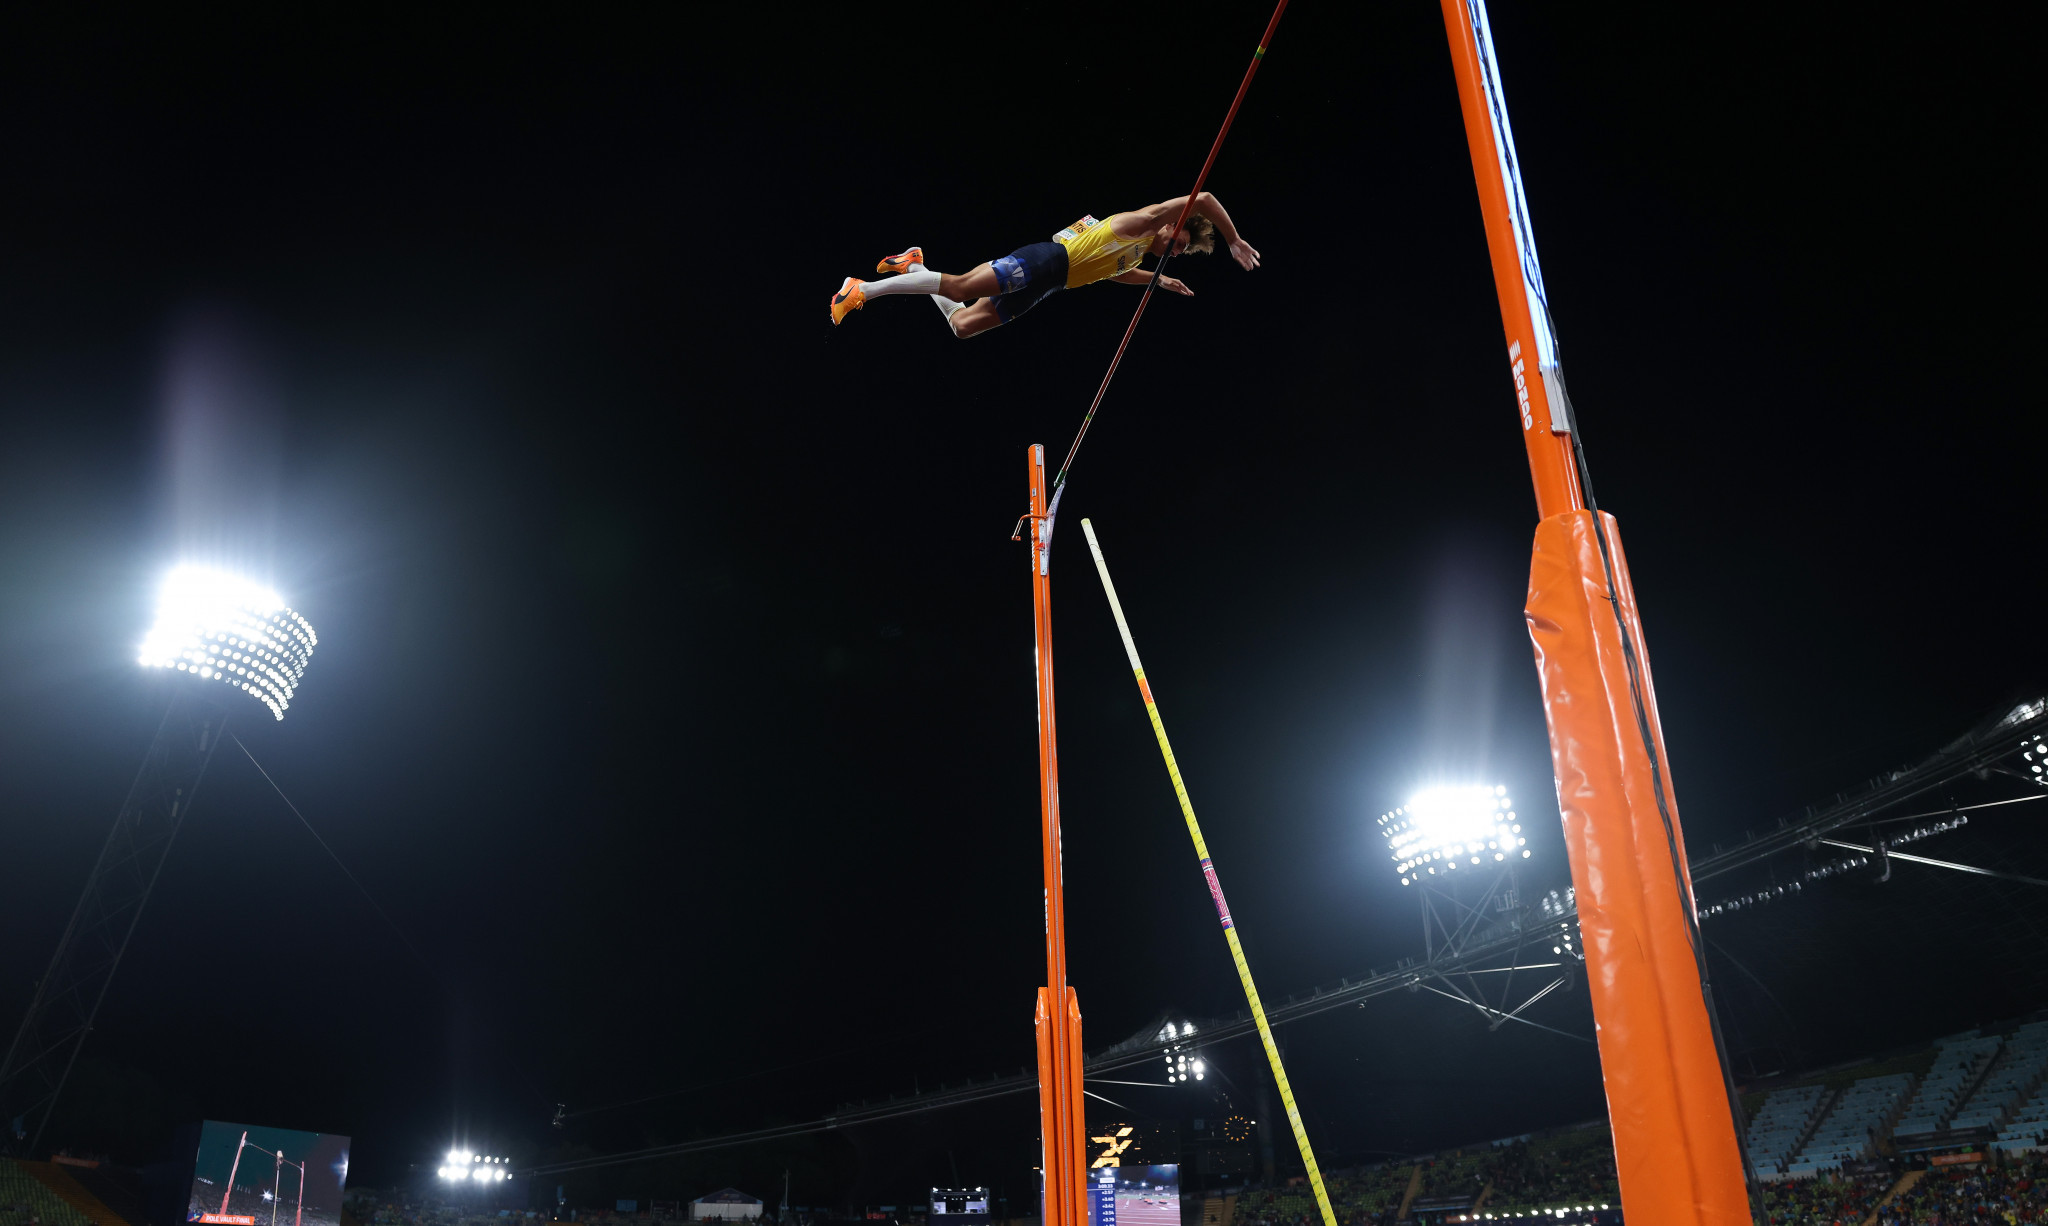 Sweden's Armand Duplantis dominated the men's pole vault final, and defended his European crown with a Championships record of 6.06m ©Getty Images